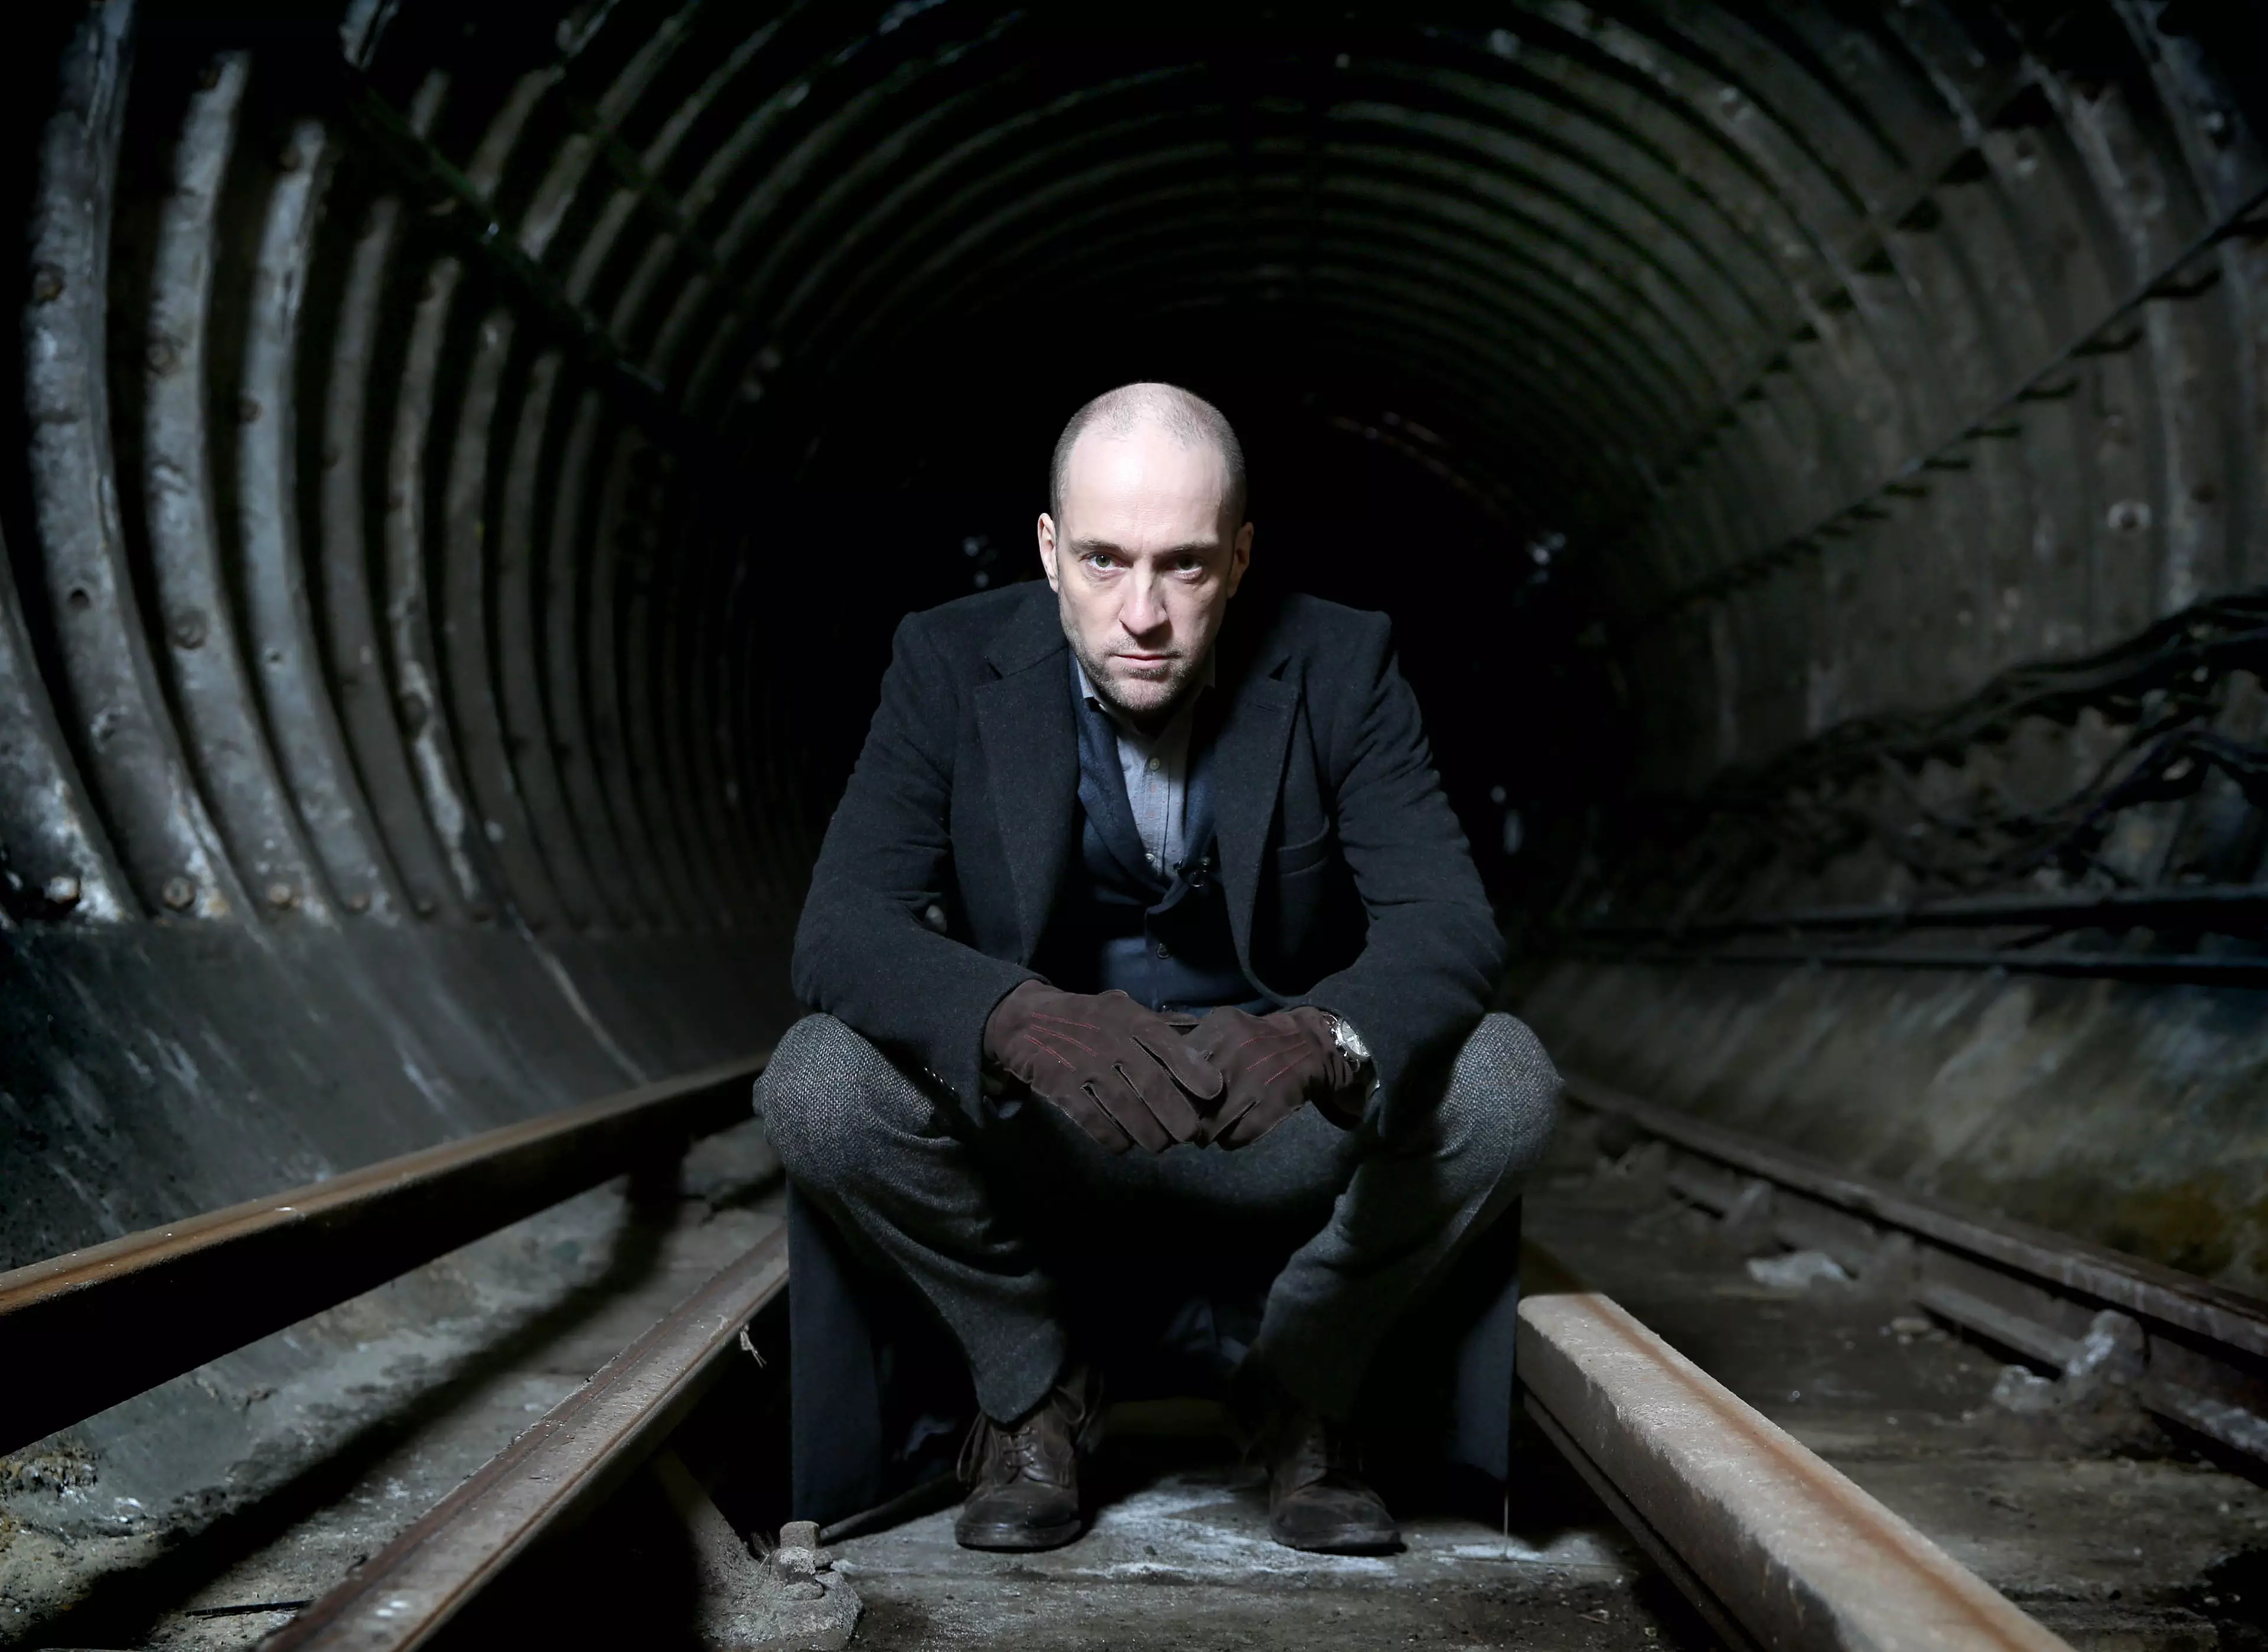 Derren Brown's special airs on Sunday at 10pm on Channel 4 (